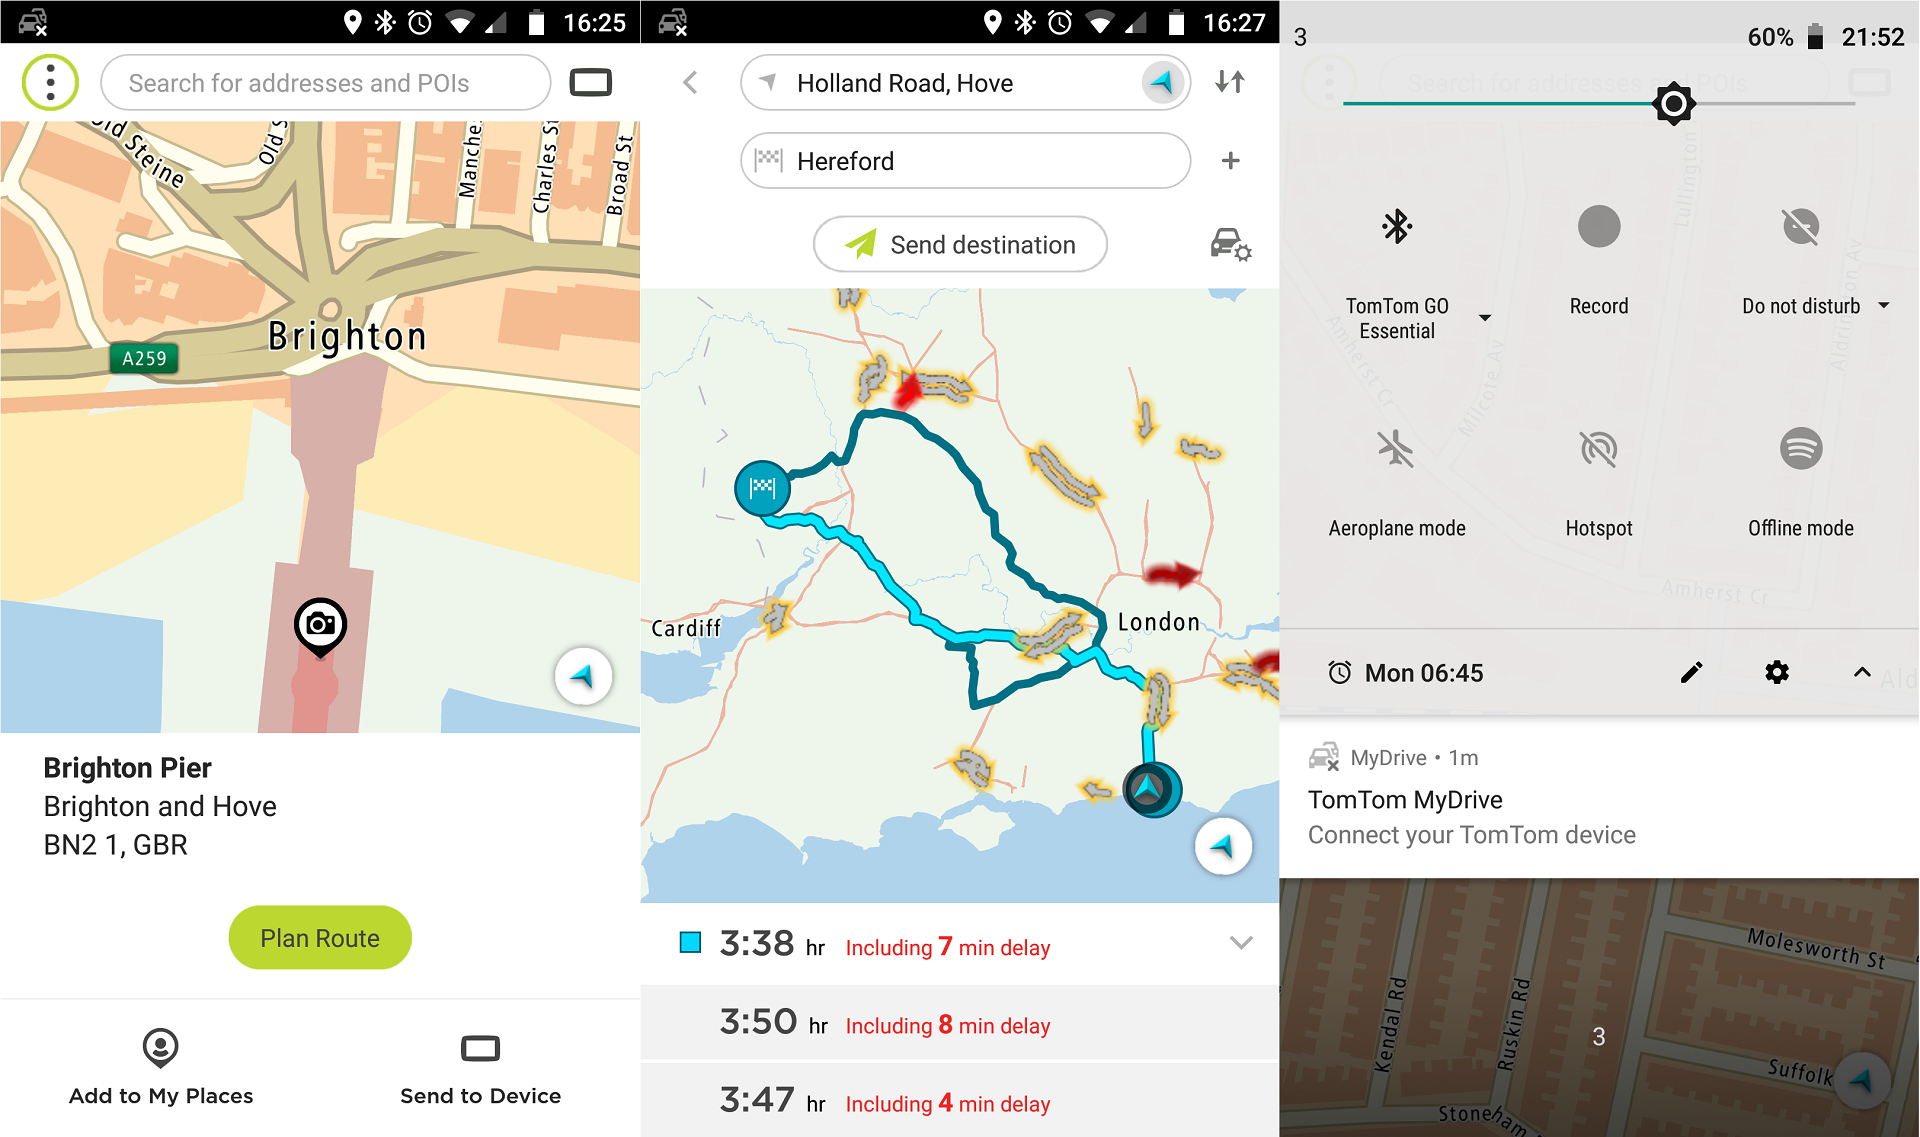 Three Android screenshots of TomTom MyDrive, showing a destination, a route, and problems with the Bluetooth connection